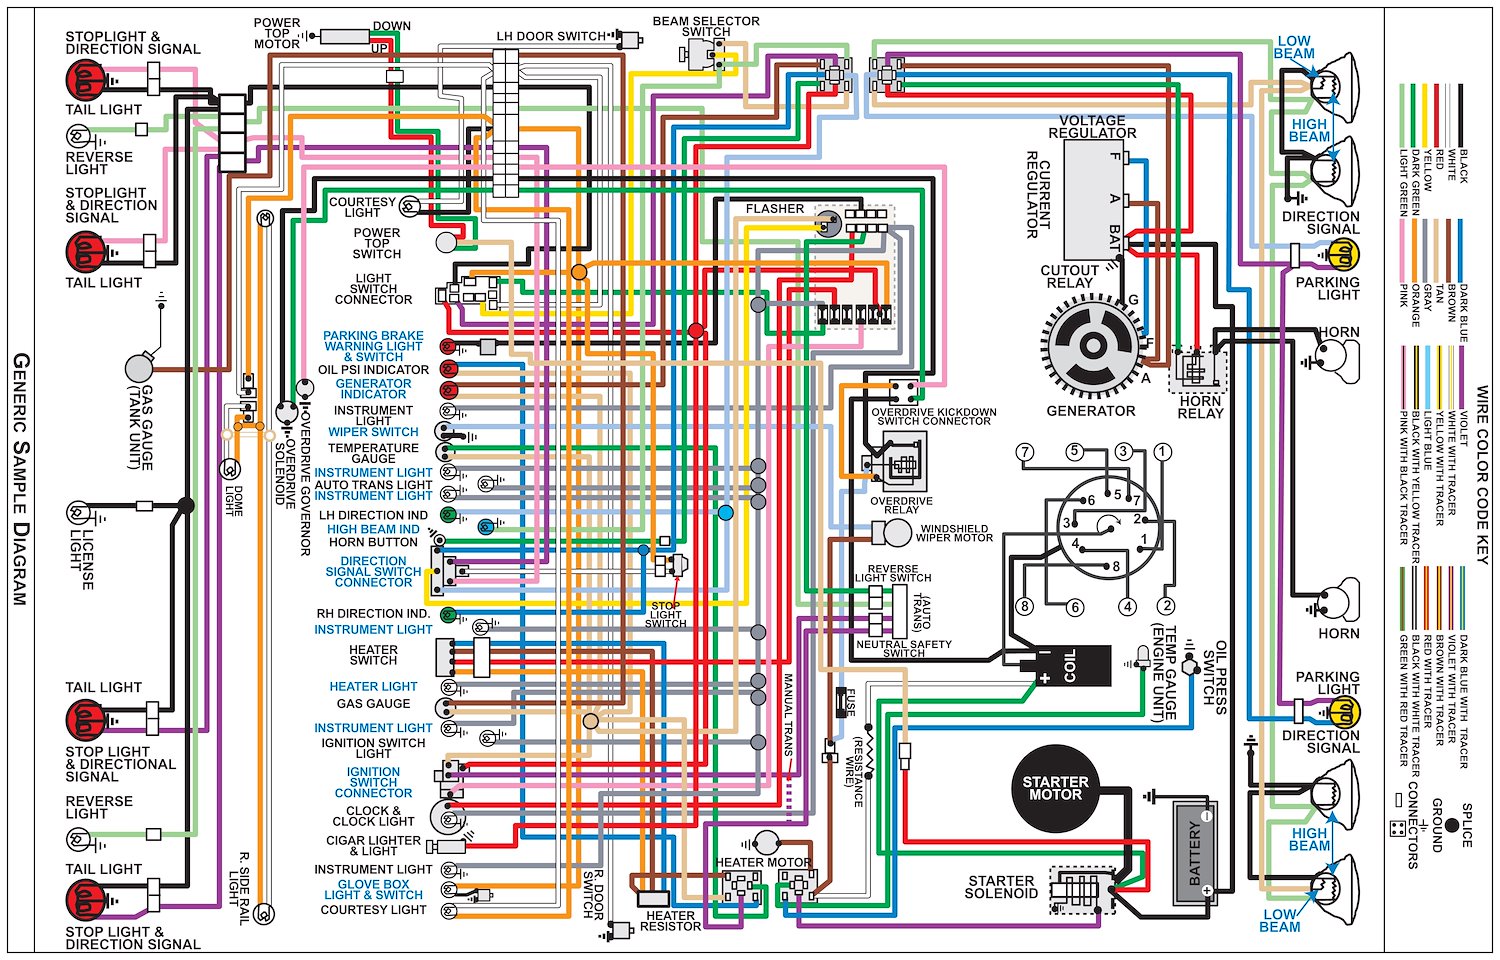 Wiring Diagram for 1966 Ford E-Series (Econoline), 11